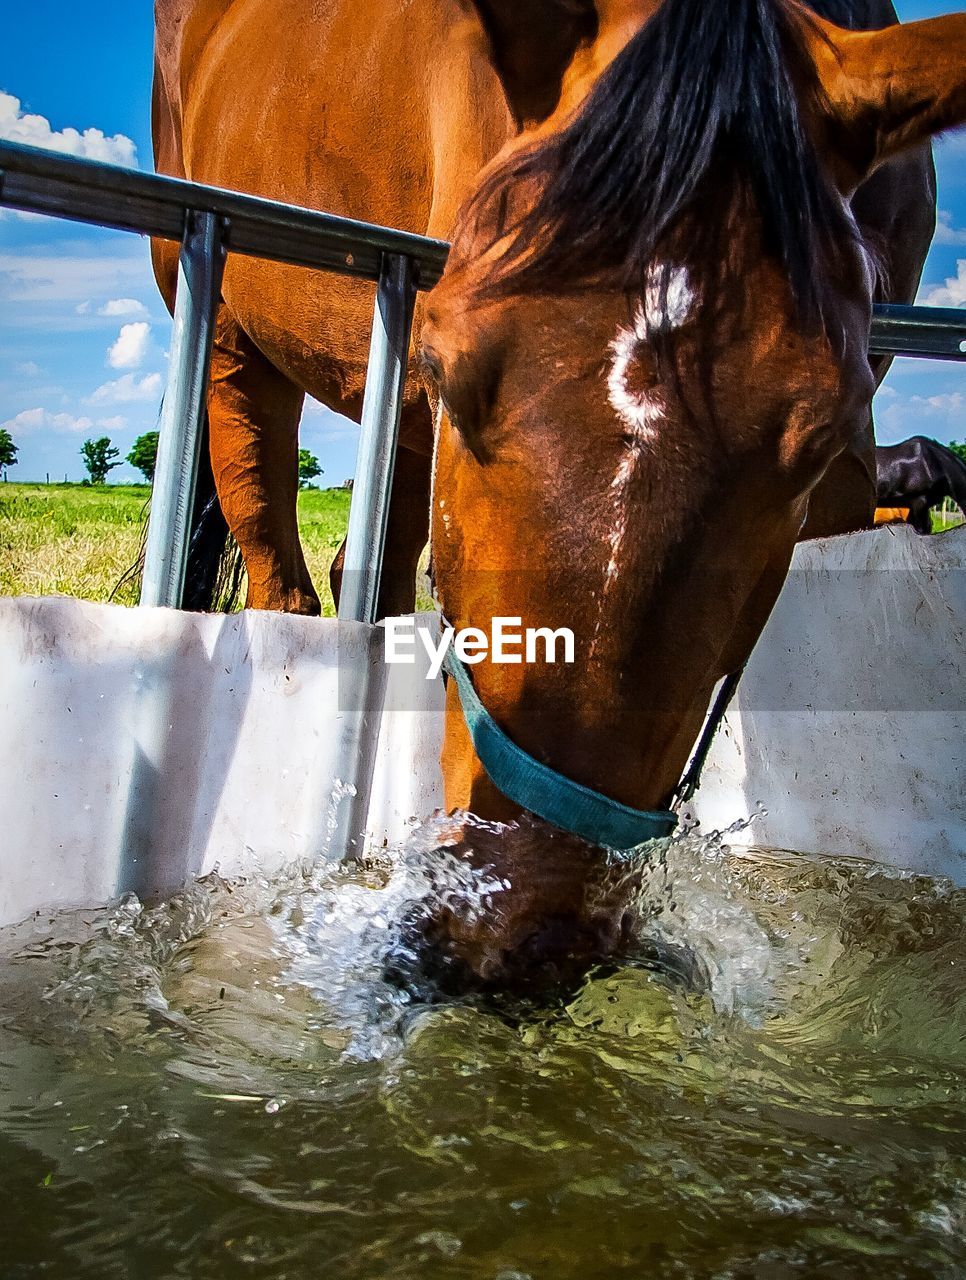 VIEW OF HORSE DRINKING WATER FROM RANCH